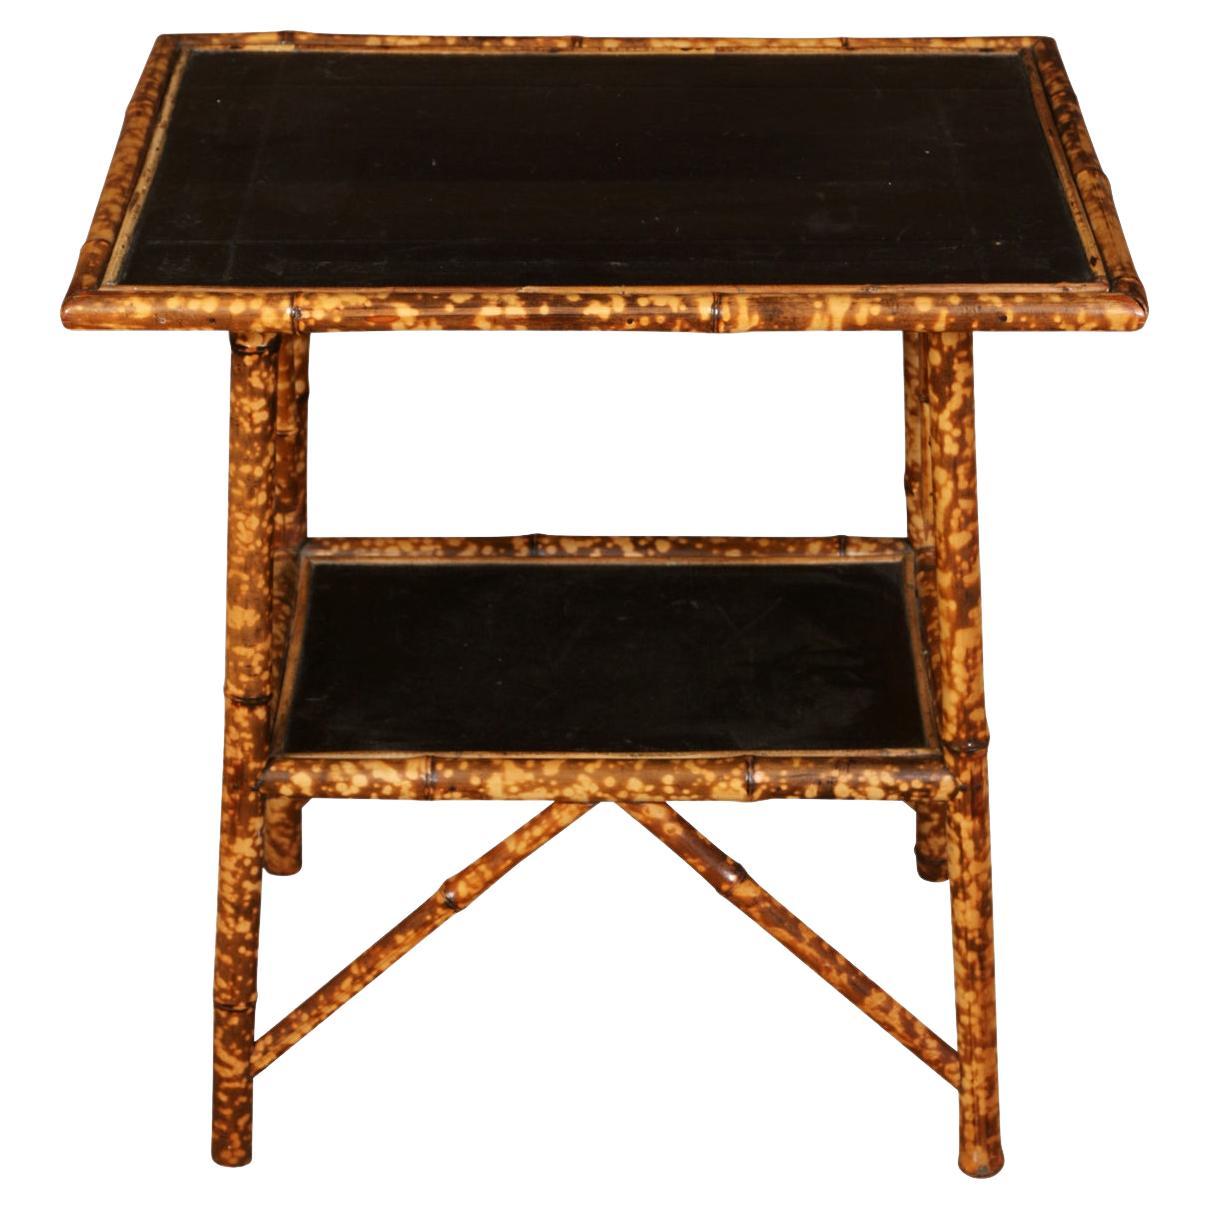 Bamboo Two Tiered Table with Black Leather Top Shelf